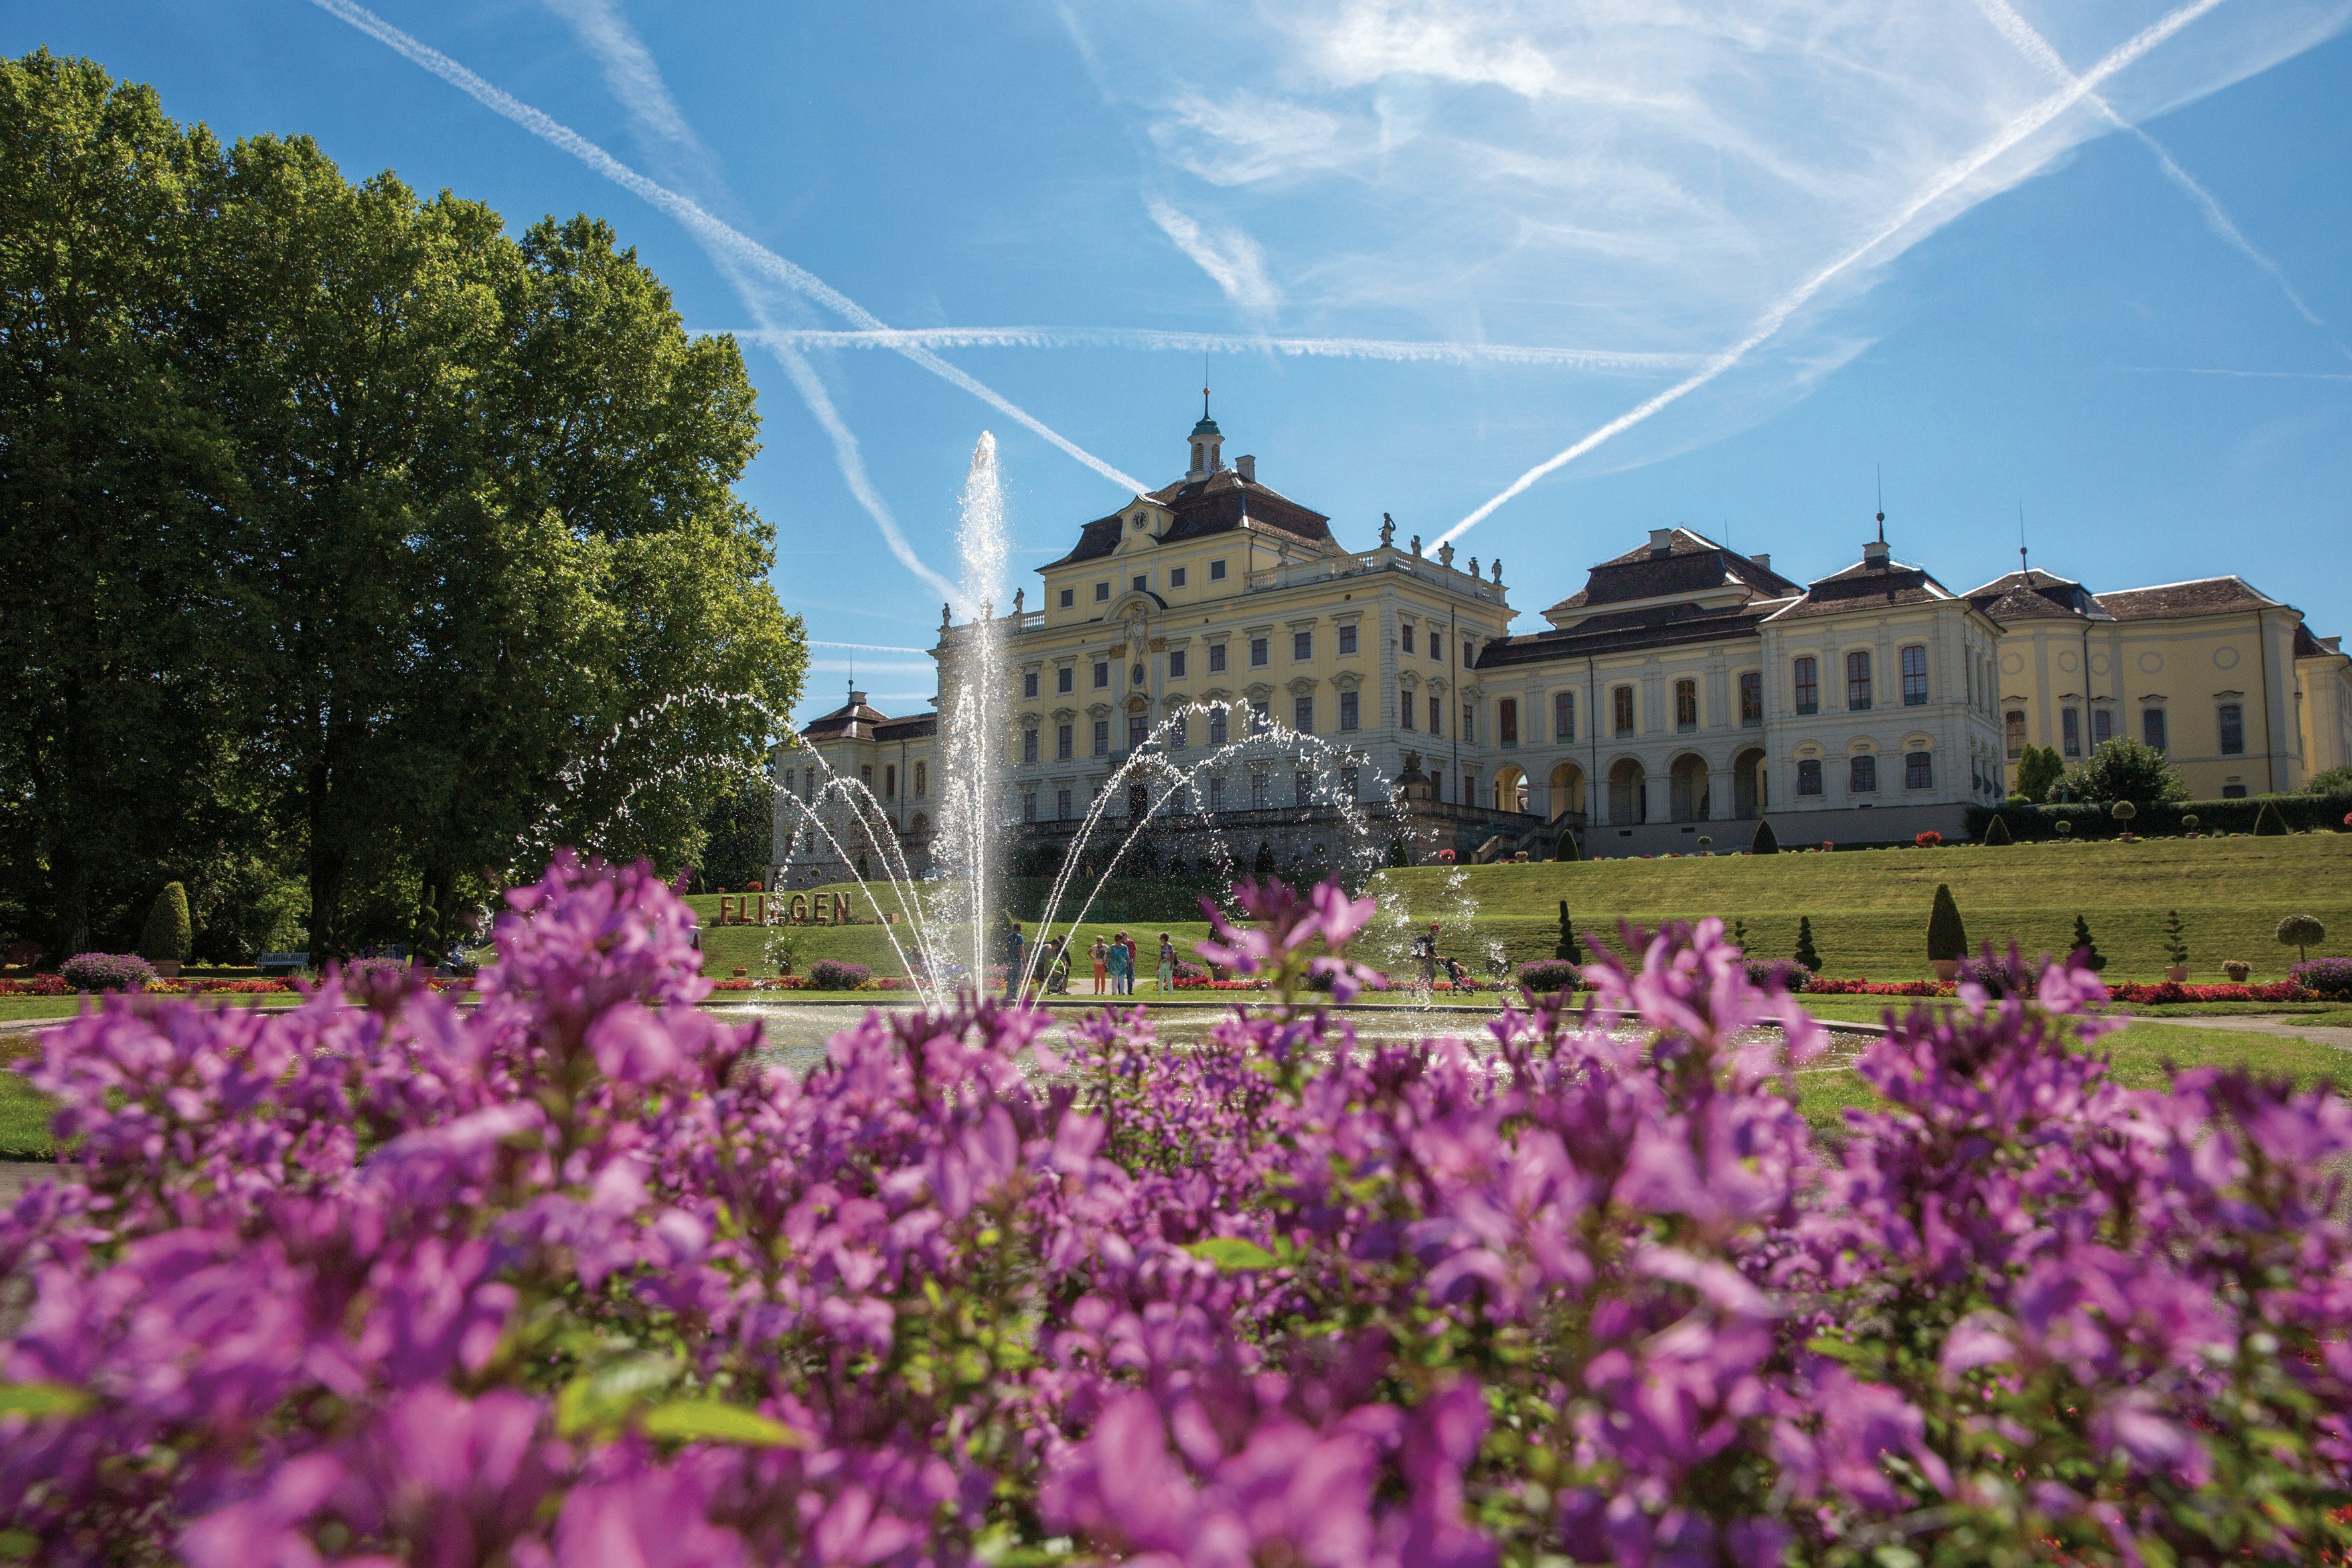 Flowers blooming outside Residenzschloss, Ludwigsburg, Germany. A fountain is visible, as are people walking in the distance.